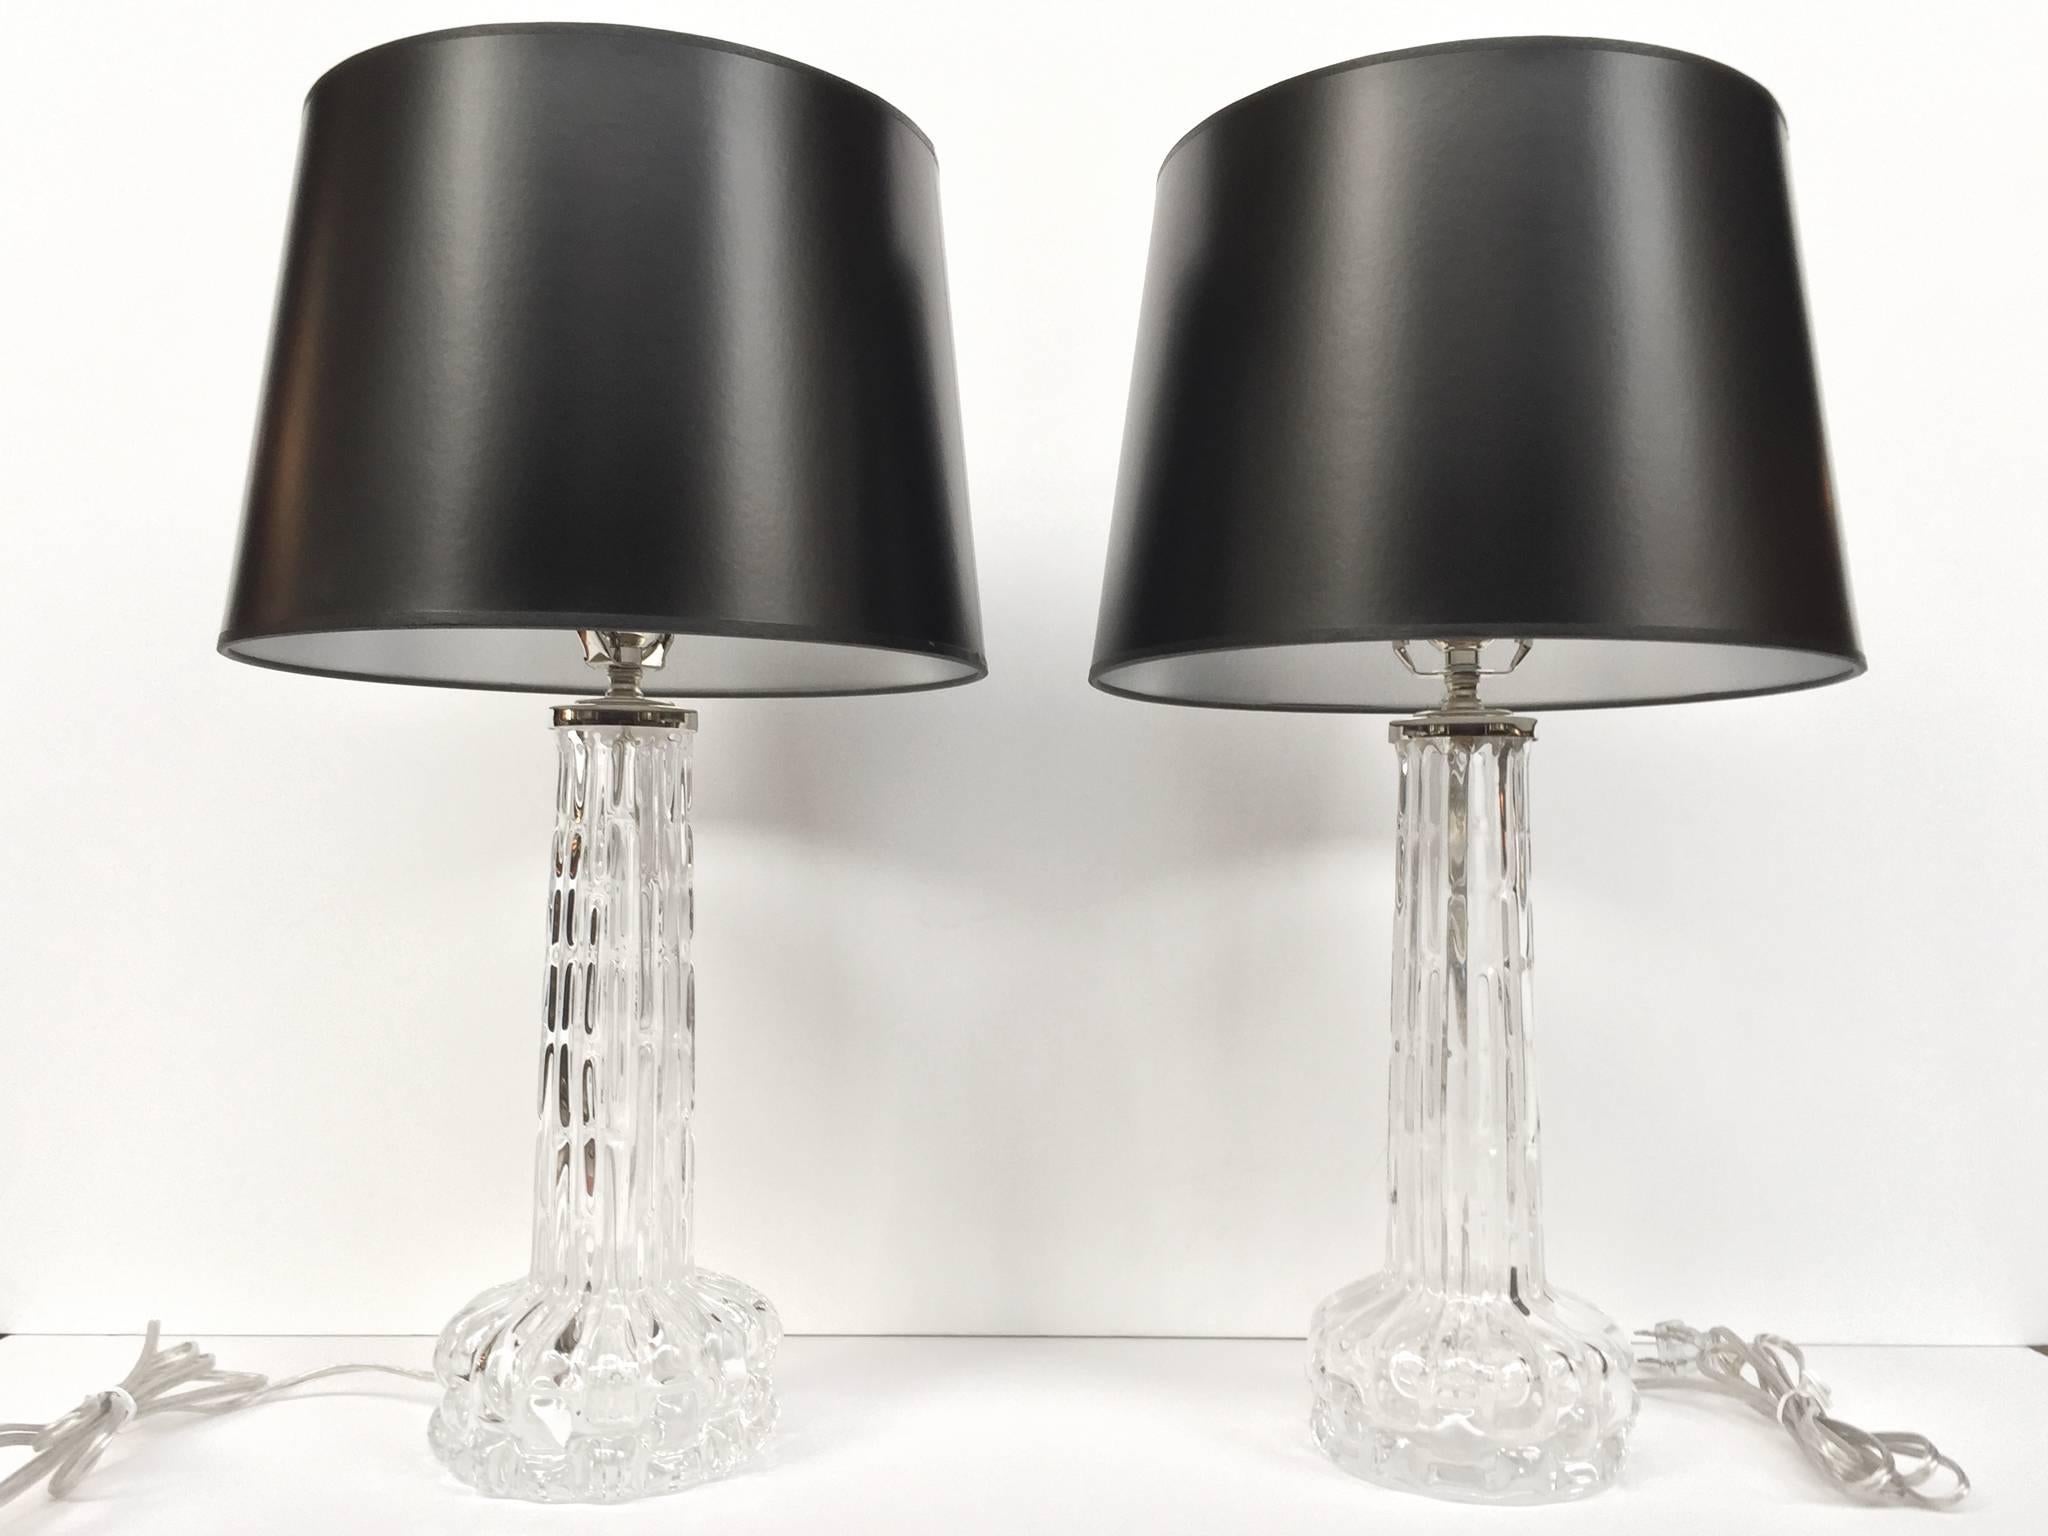 Scandinavian Modern Pair of 1950s Orrefors Art Glass Table Lamps by Carl Fagerlund For Sale